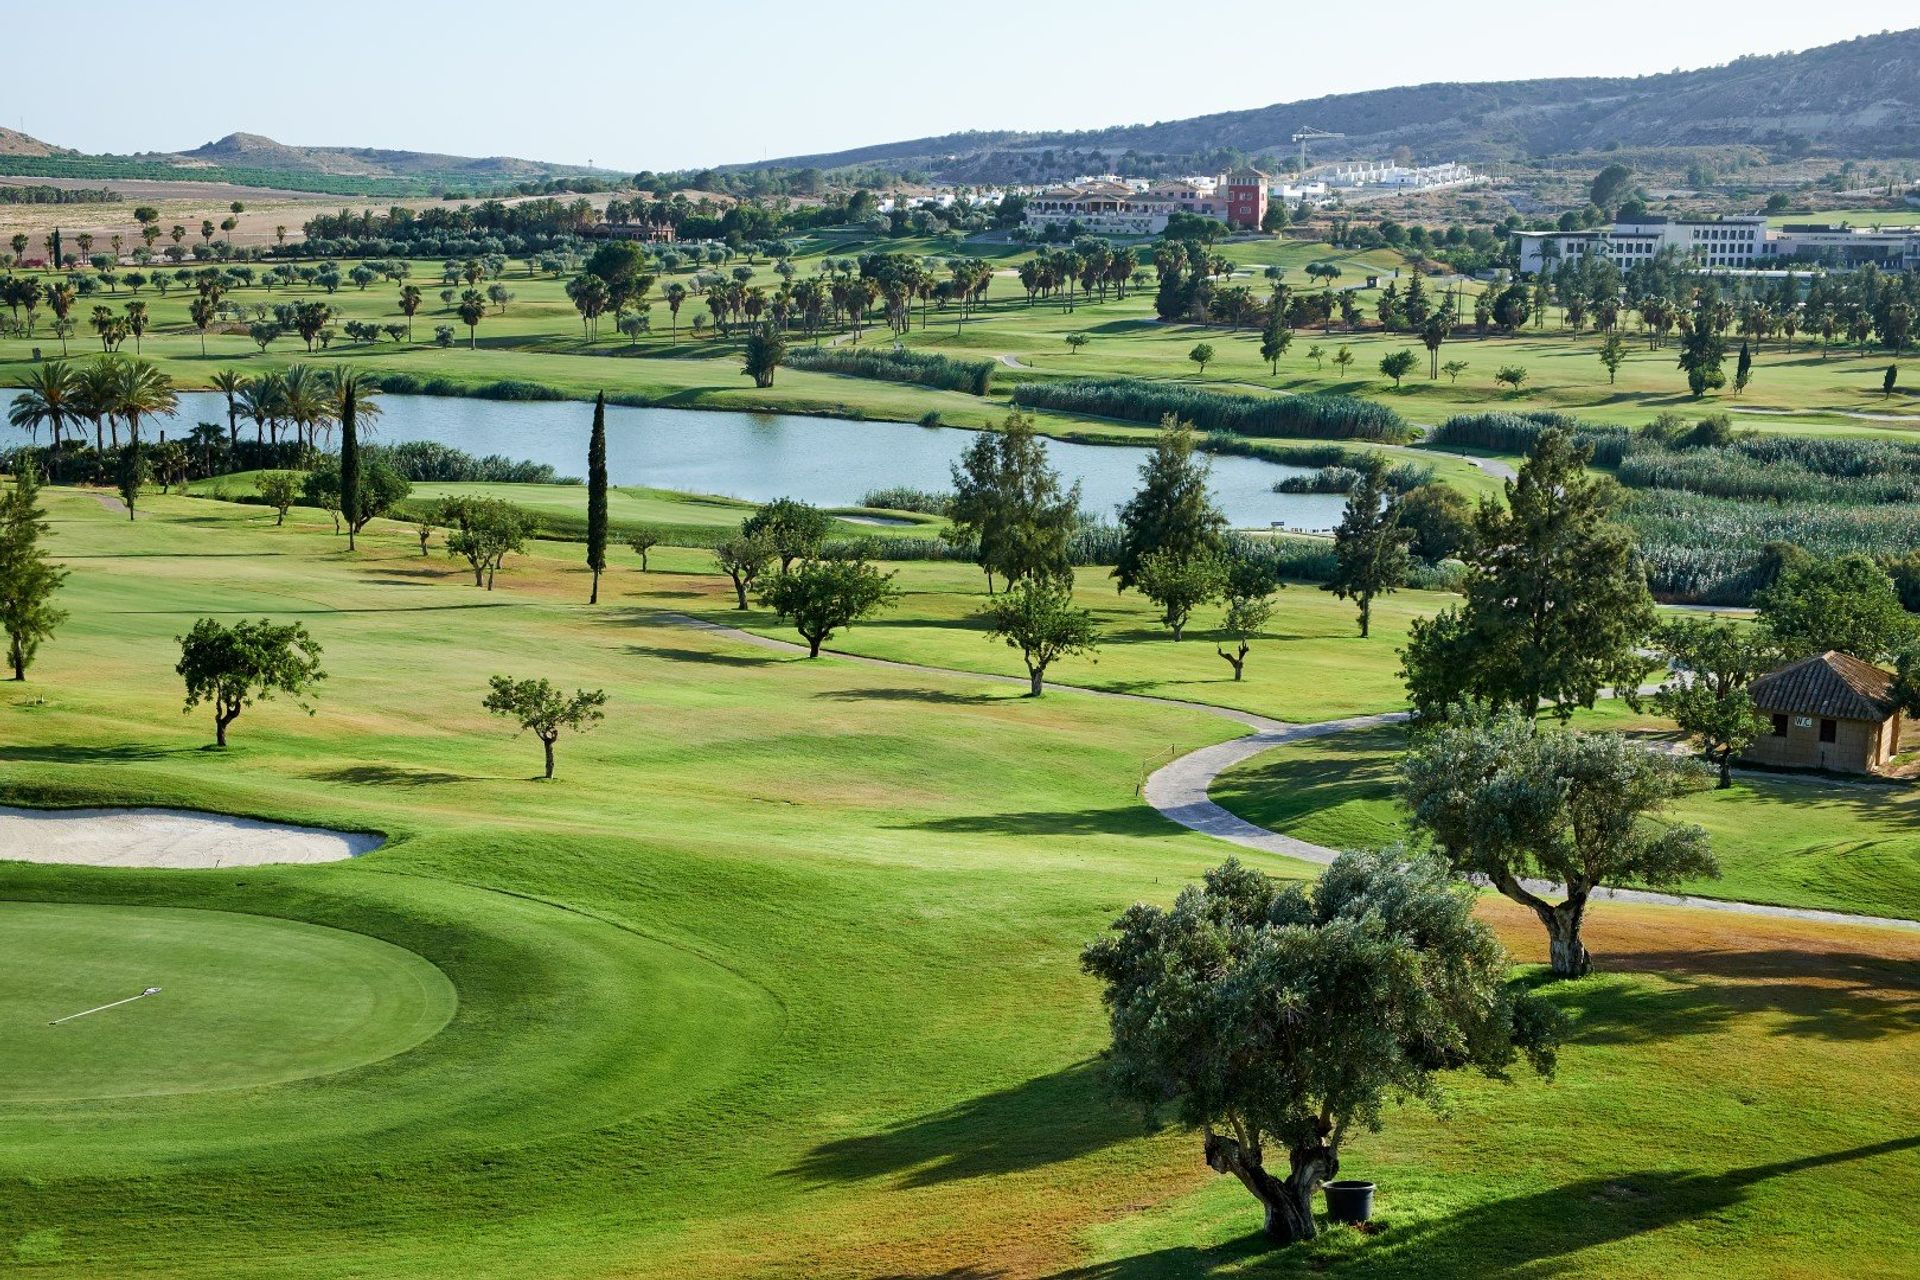 Practice your swing at one of the many superb golf courses that can be found in and around Algorfa